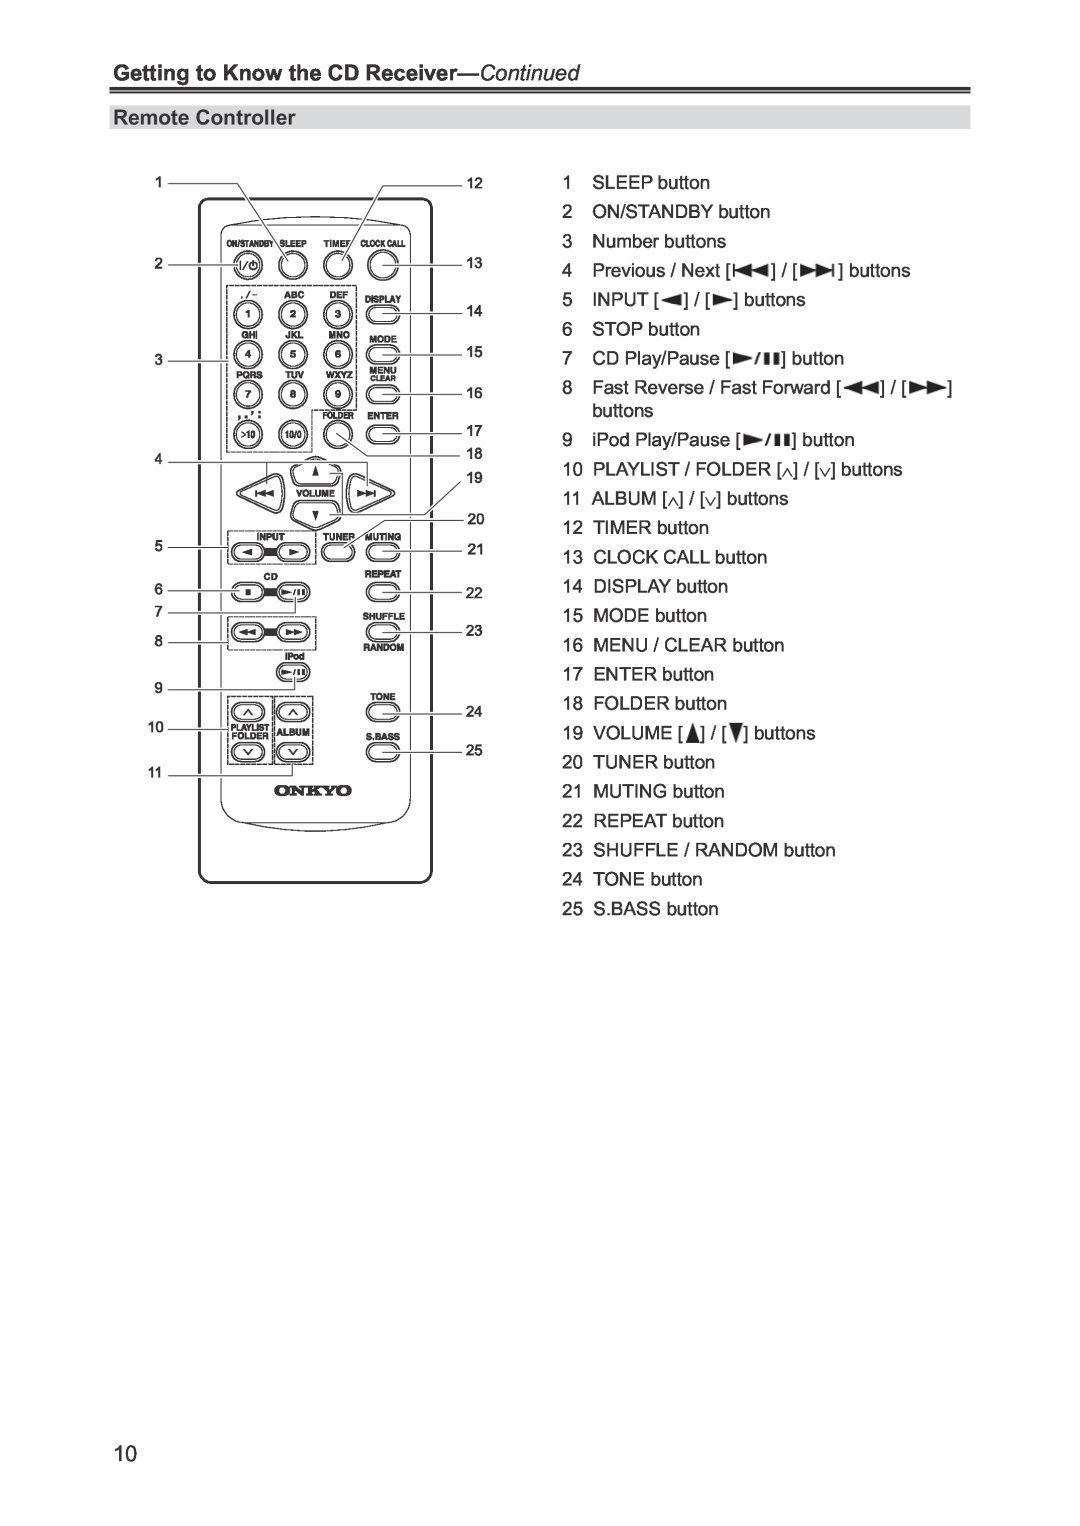 Onkyo CR-445 instruction manual Remote Controller, Getting to Know the CD Receiver-Continued 